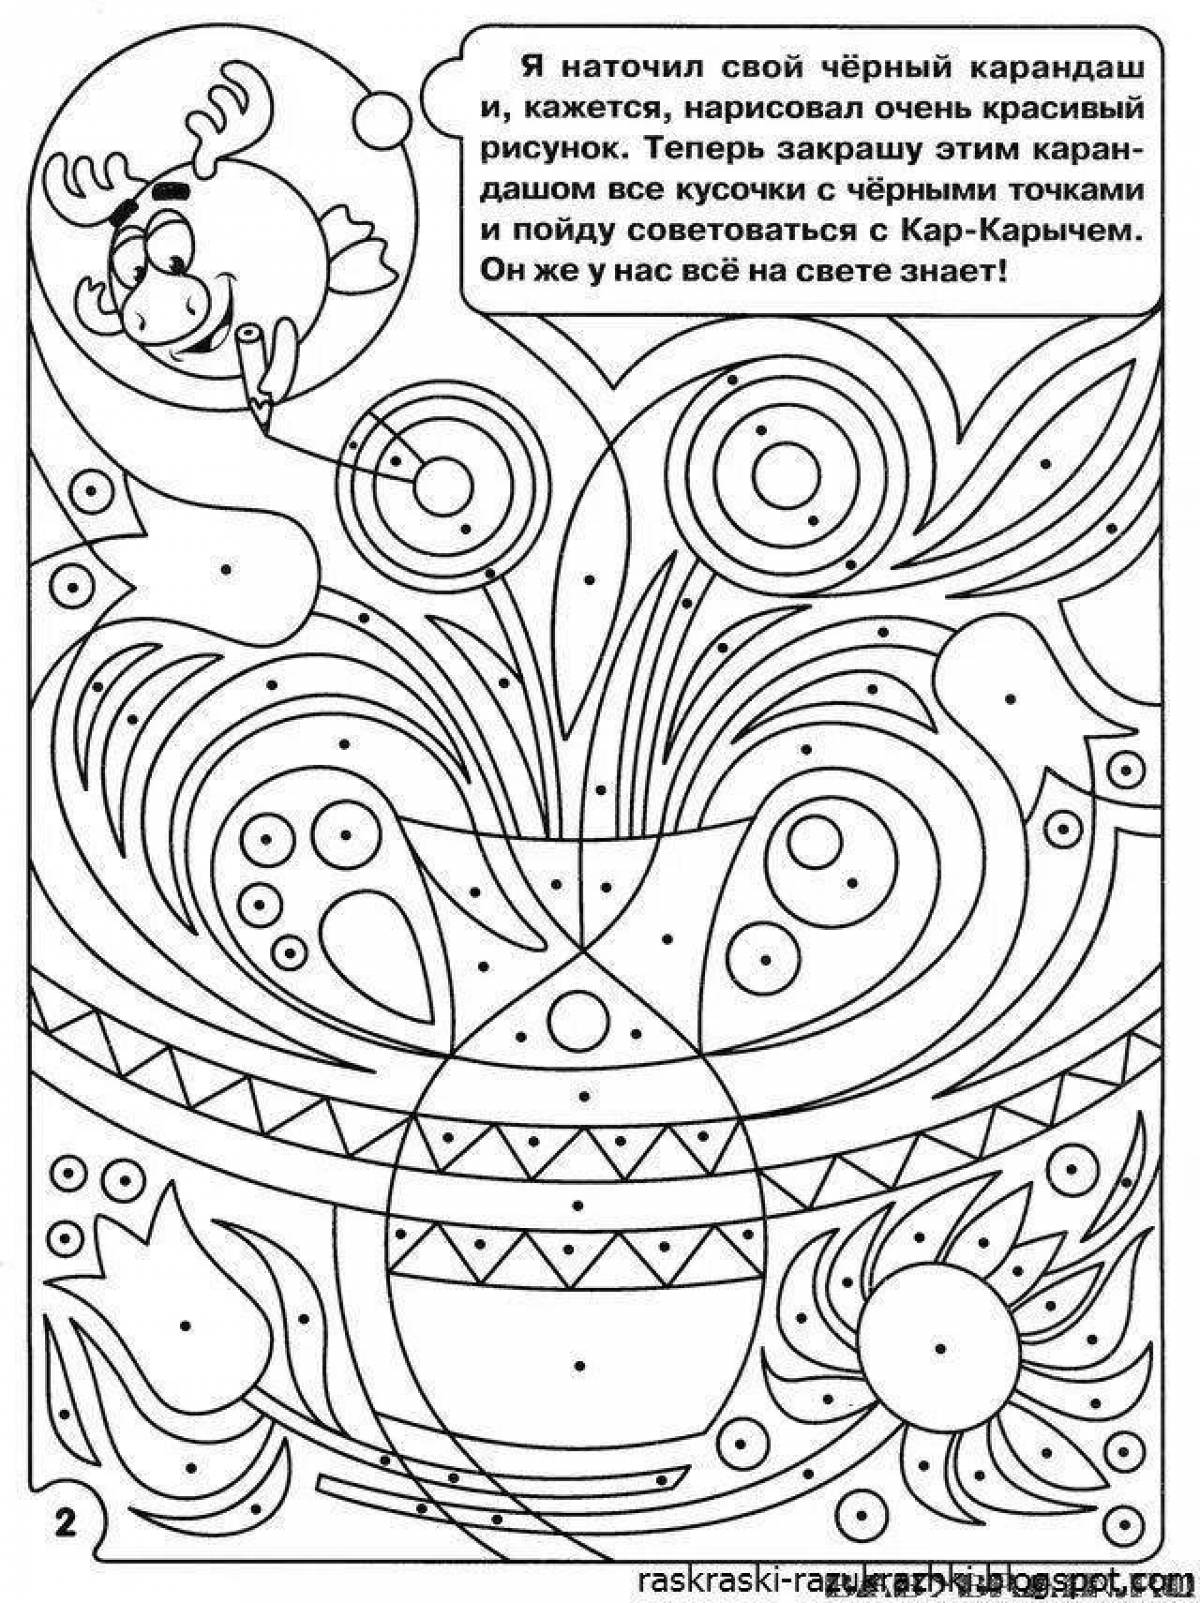 Colorful coloring book for curious and bright children aged 5-6